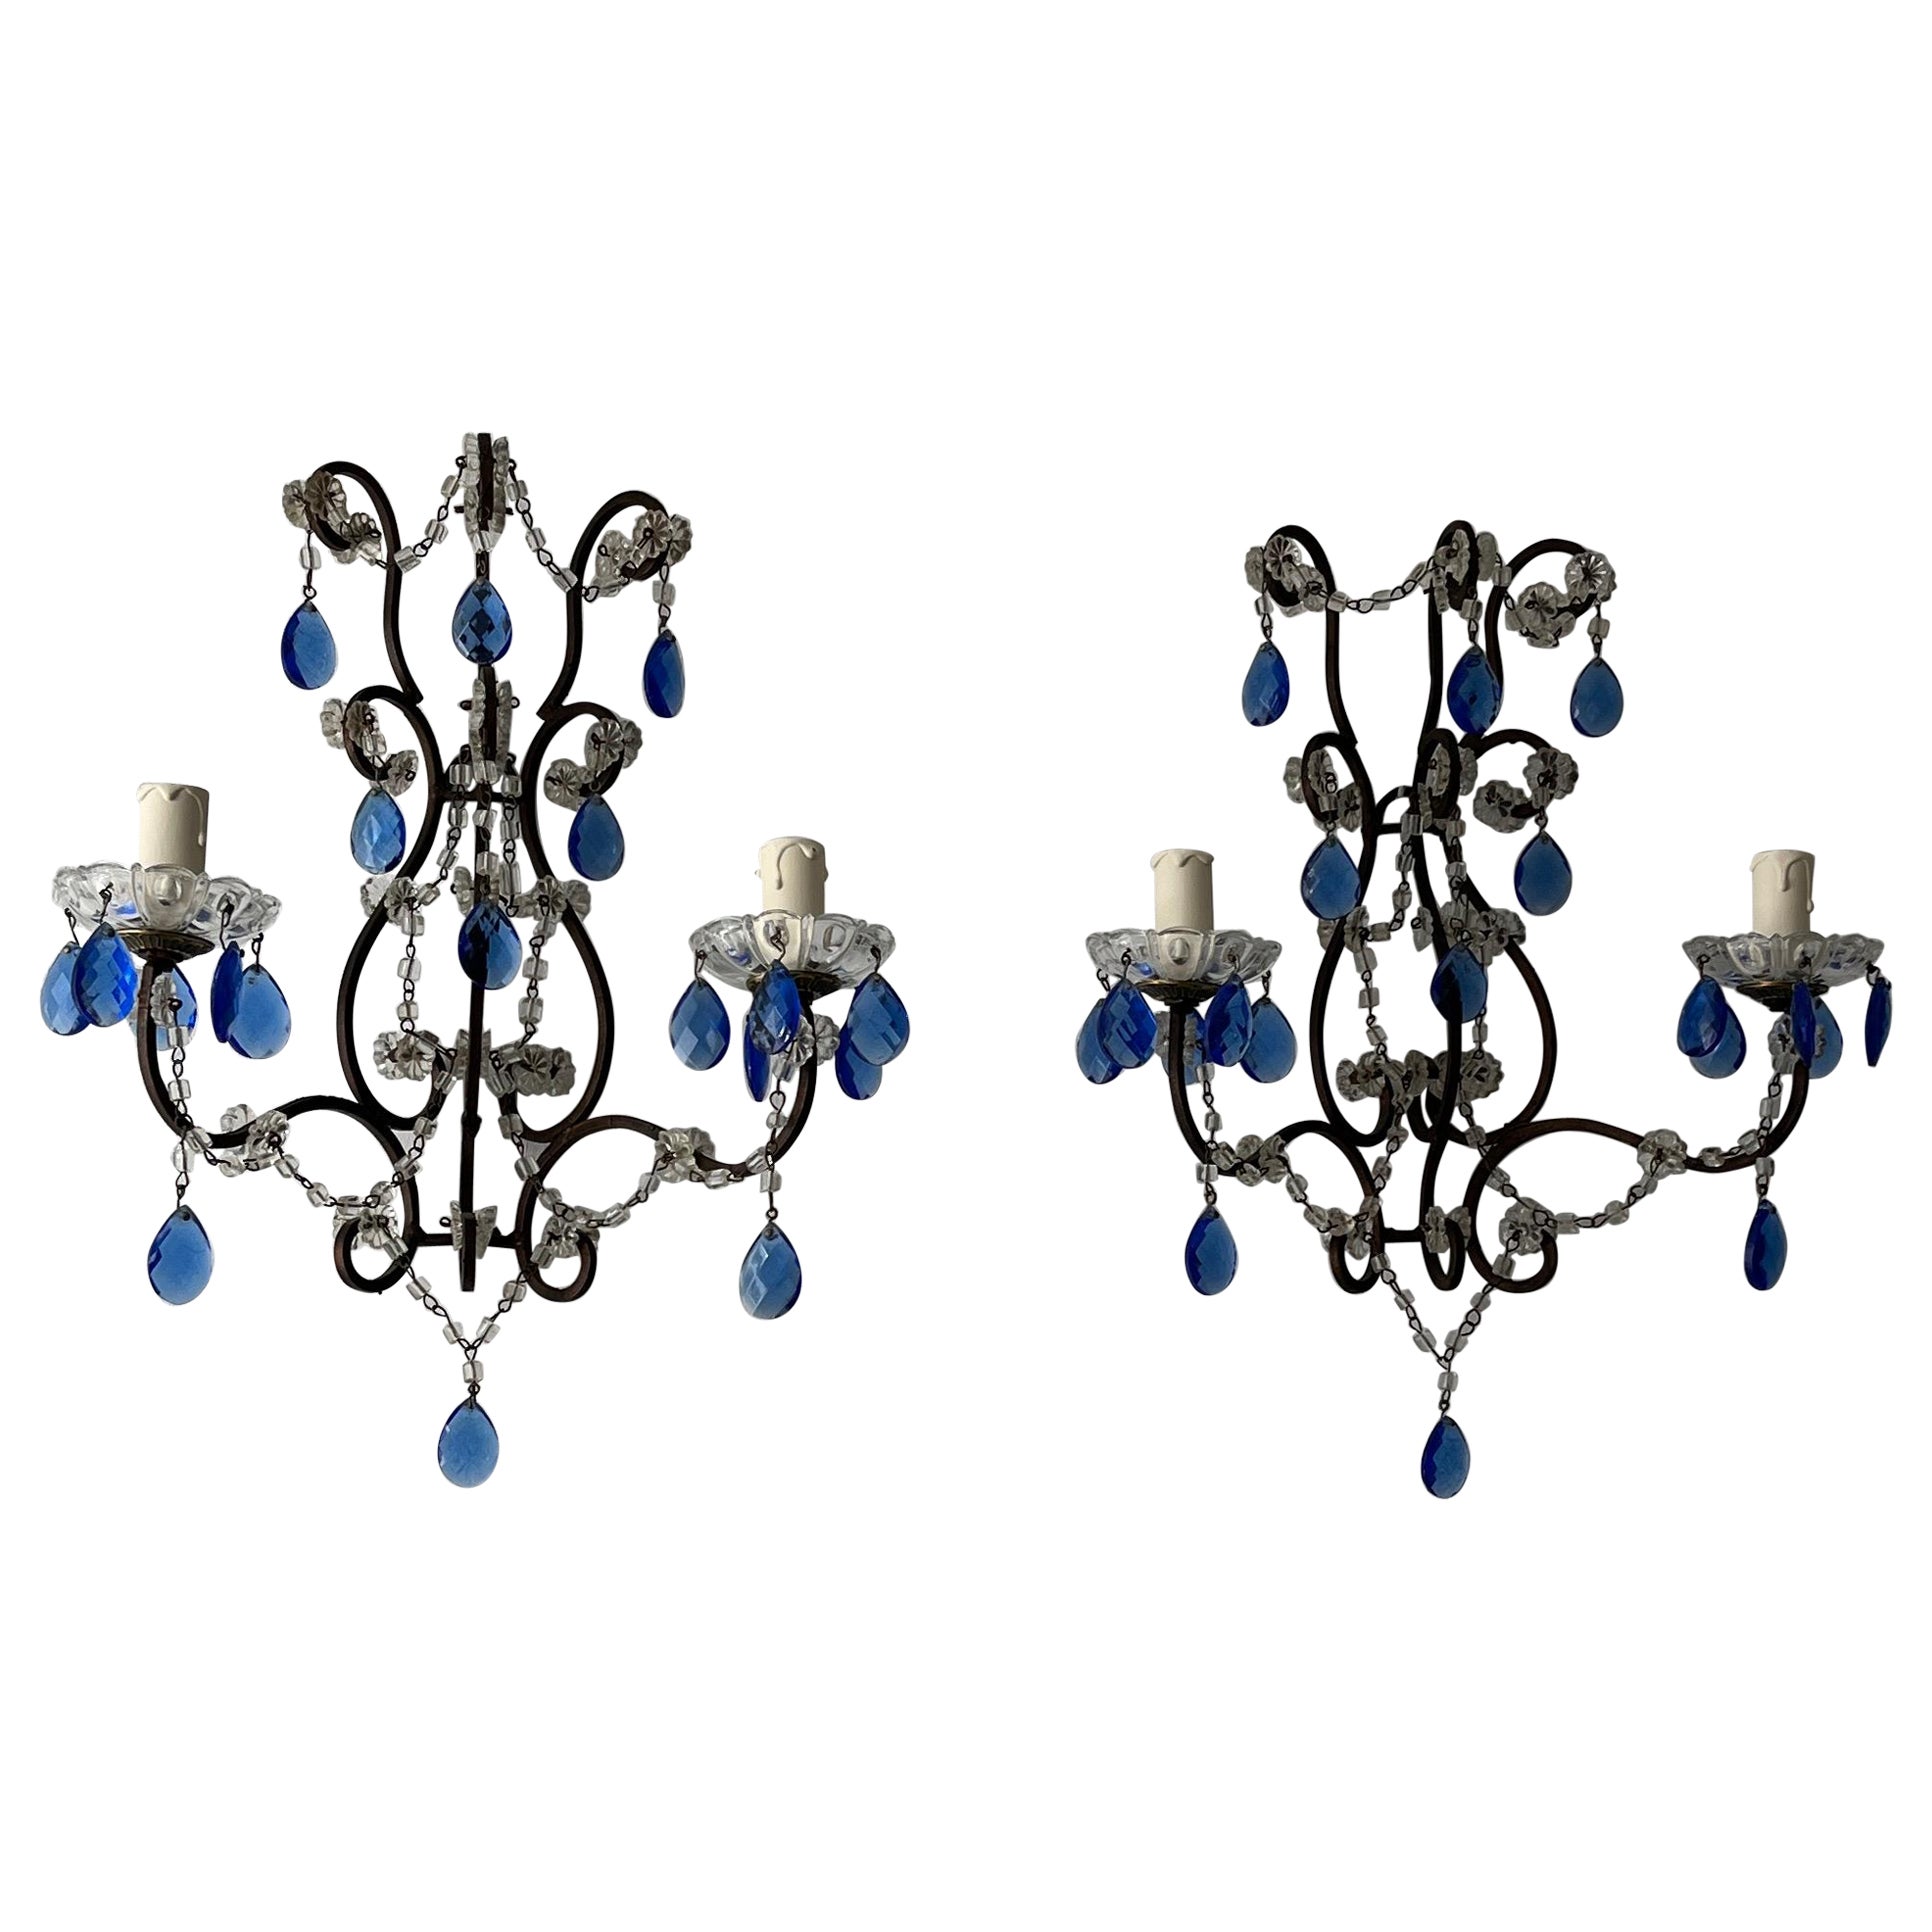 Beautiful French Cobalt Blue Prisms Macaroni Bead Swags Sconces c1920 For Sale